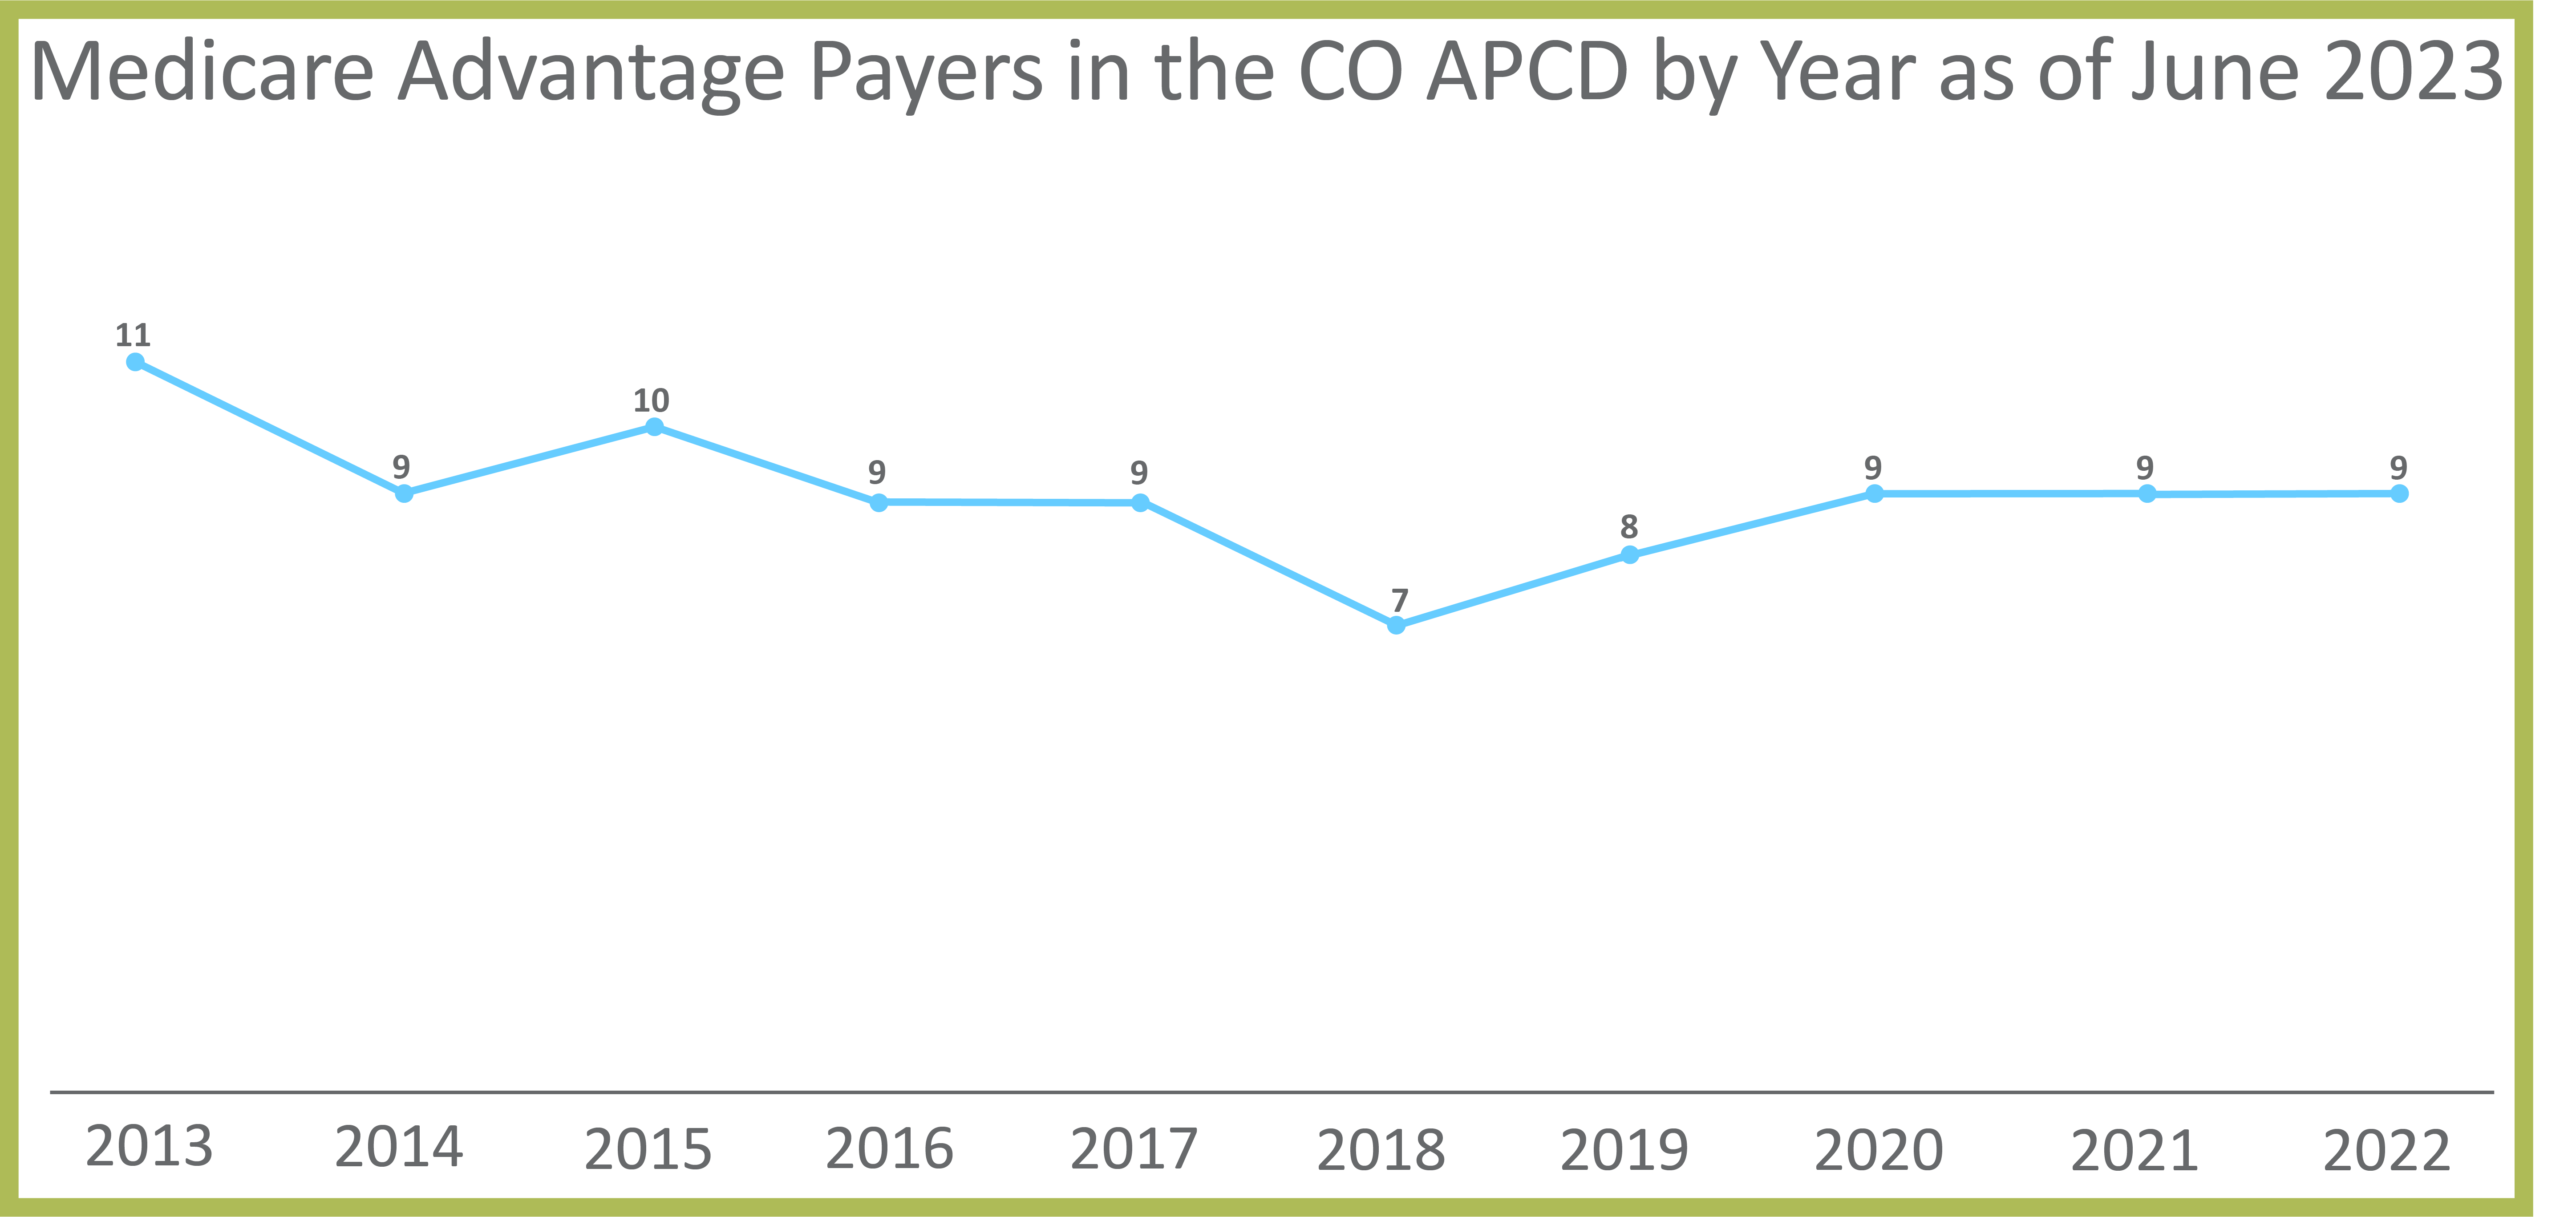 As of June 2023, there were 9 Medicare Advantage payers in the CO APCD. 